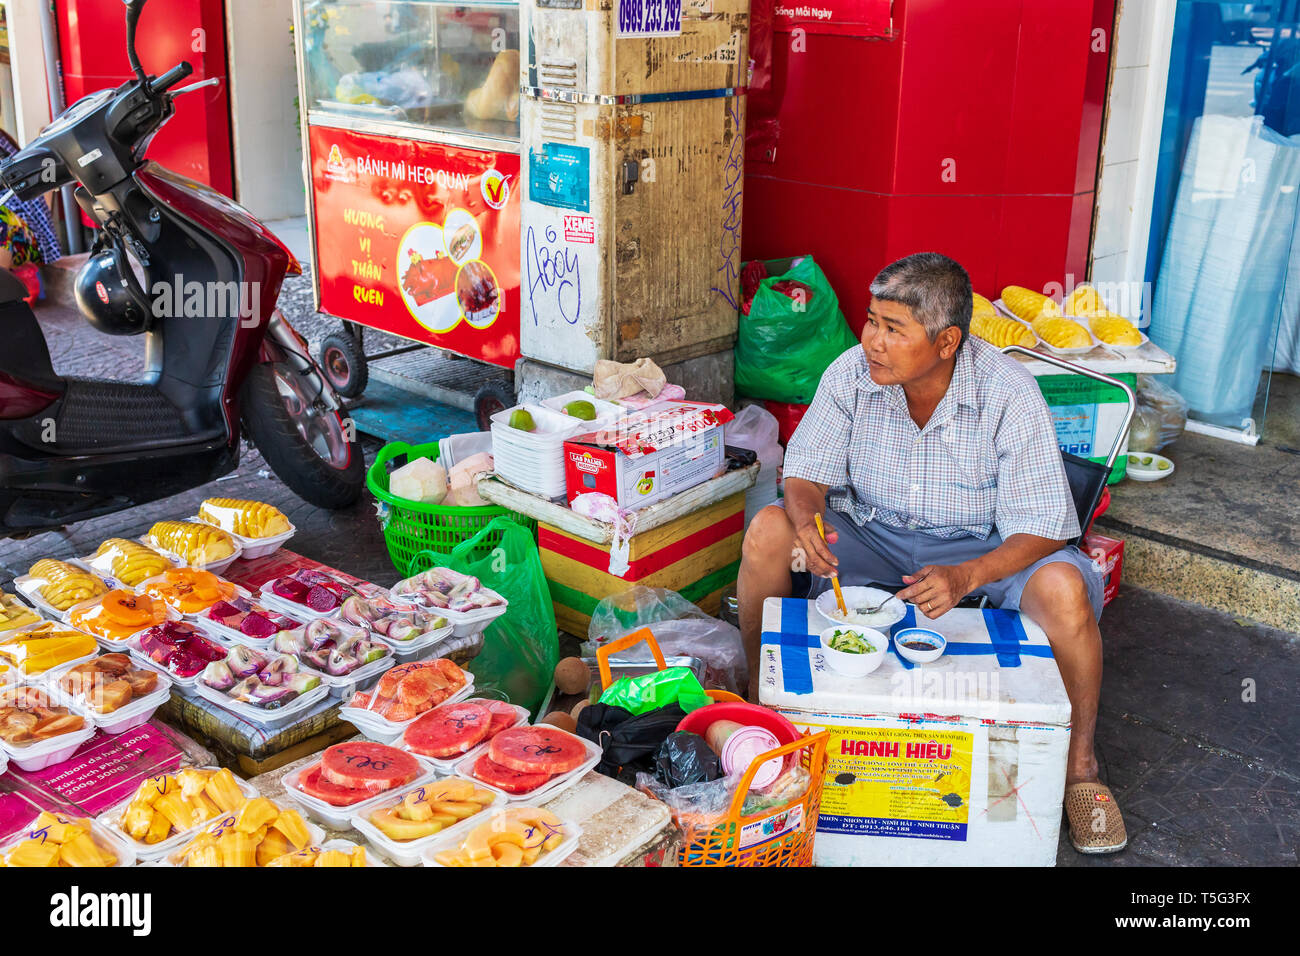 Man selling fresh fruit from an open stall at Ben Thanh street market, Ho Chi Minh City, Saigon, Vietnam, Asia Stock Photo